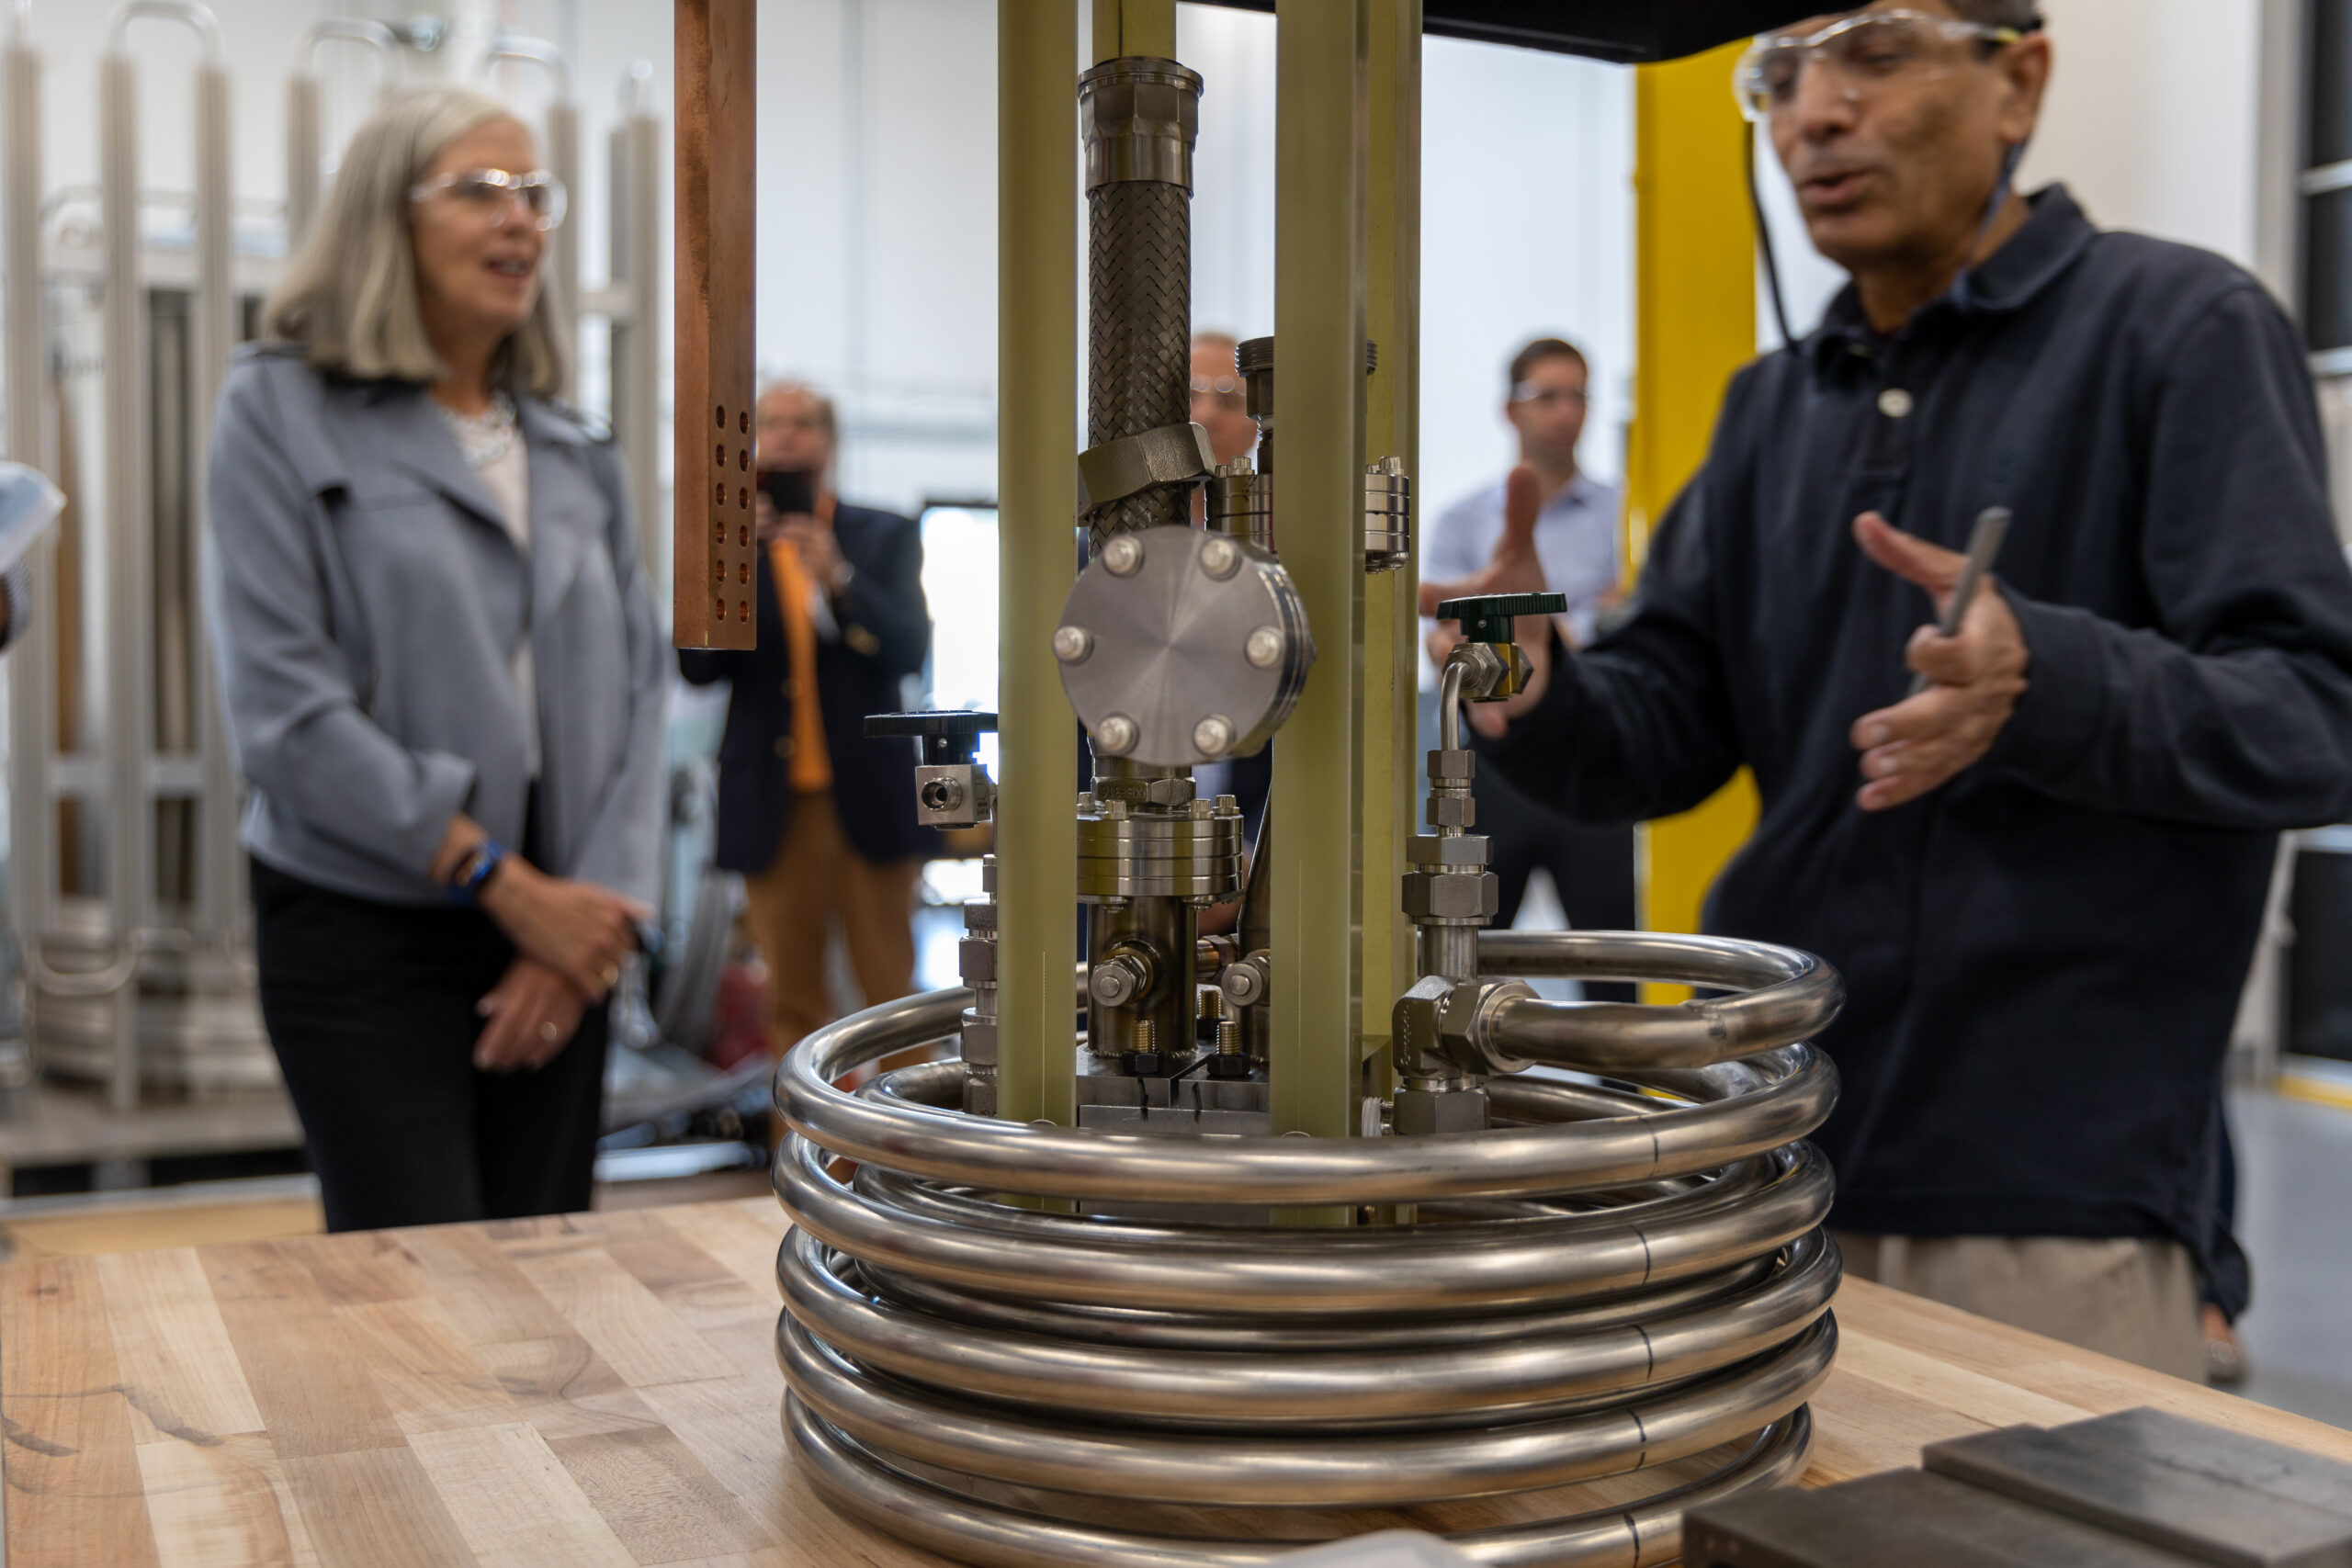 A scientist gestures to a thick coil of metal wires. 